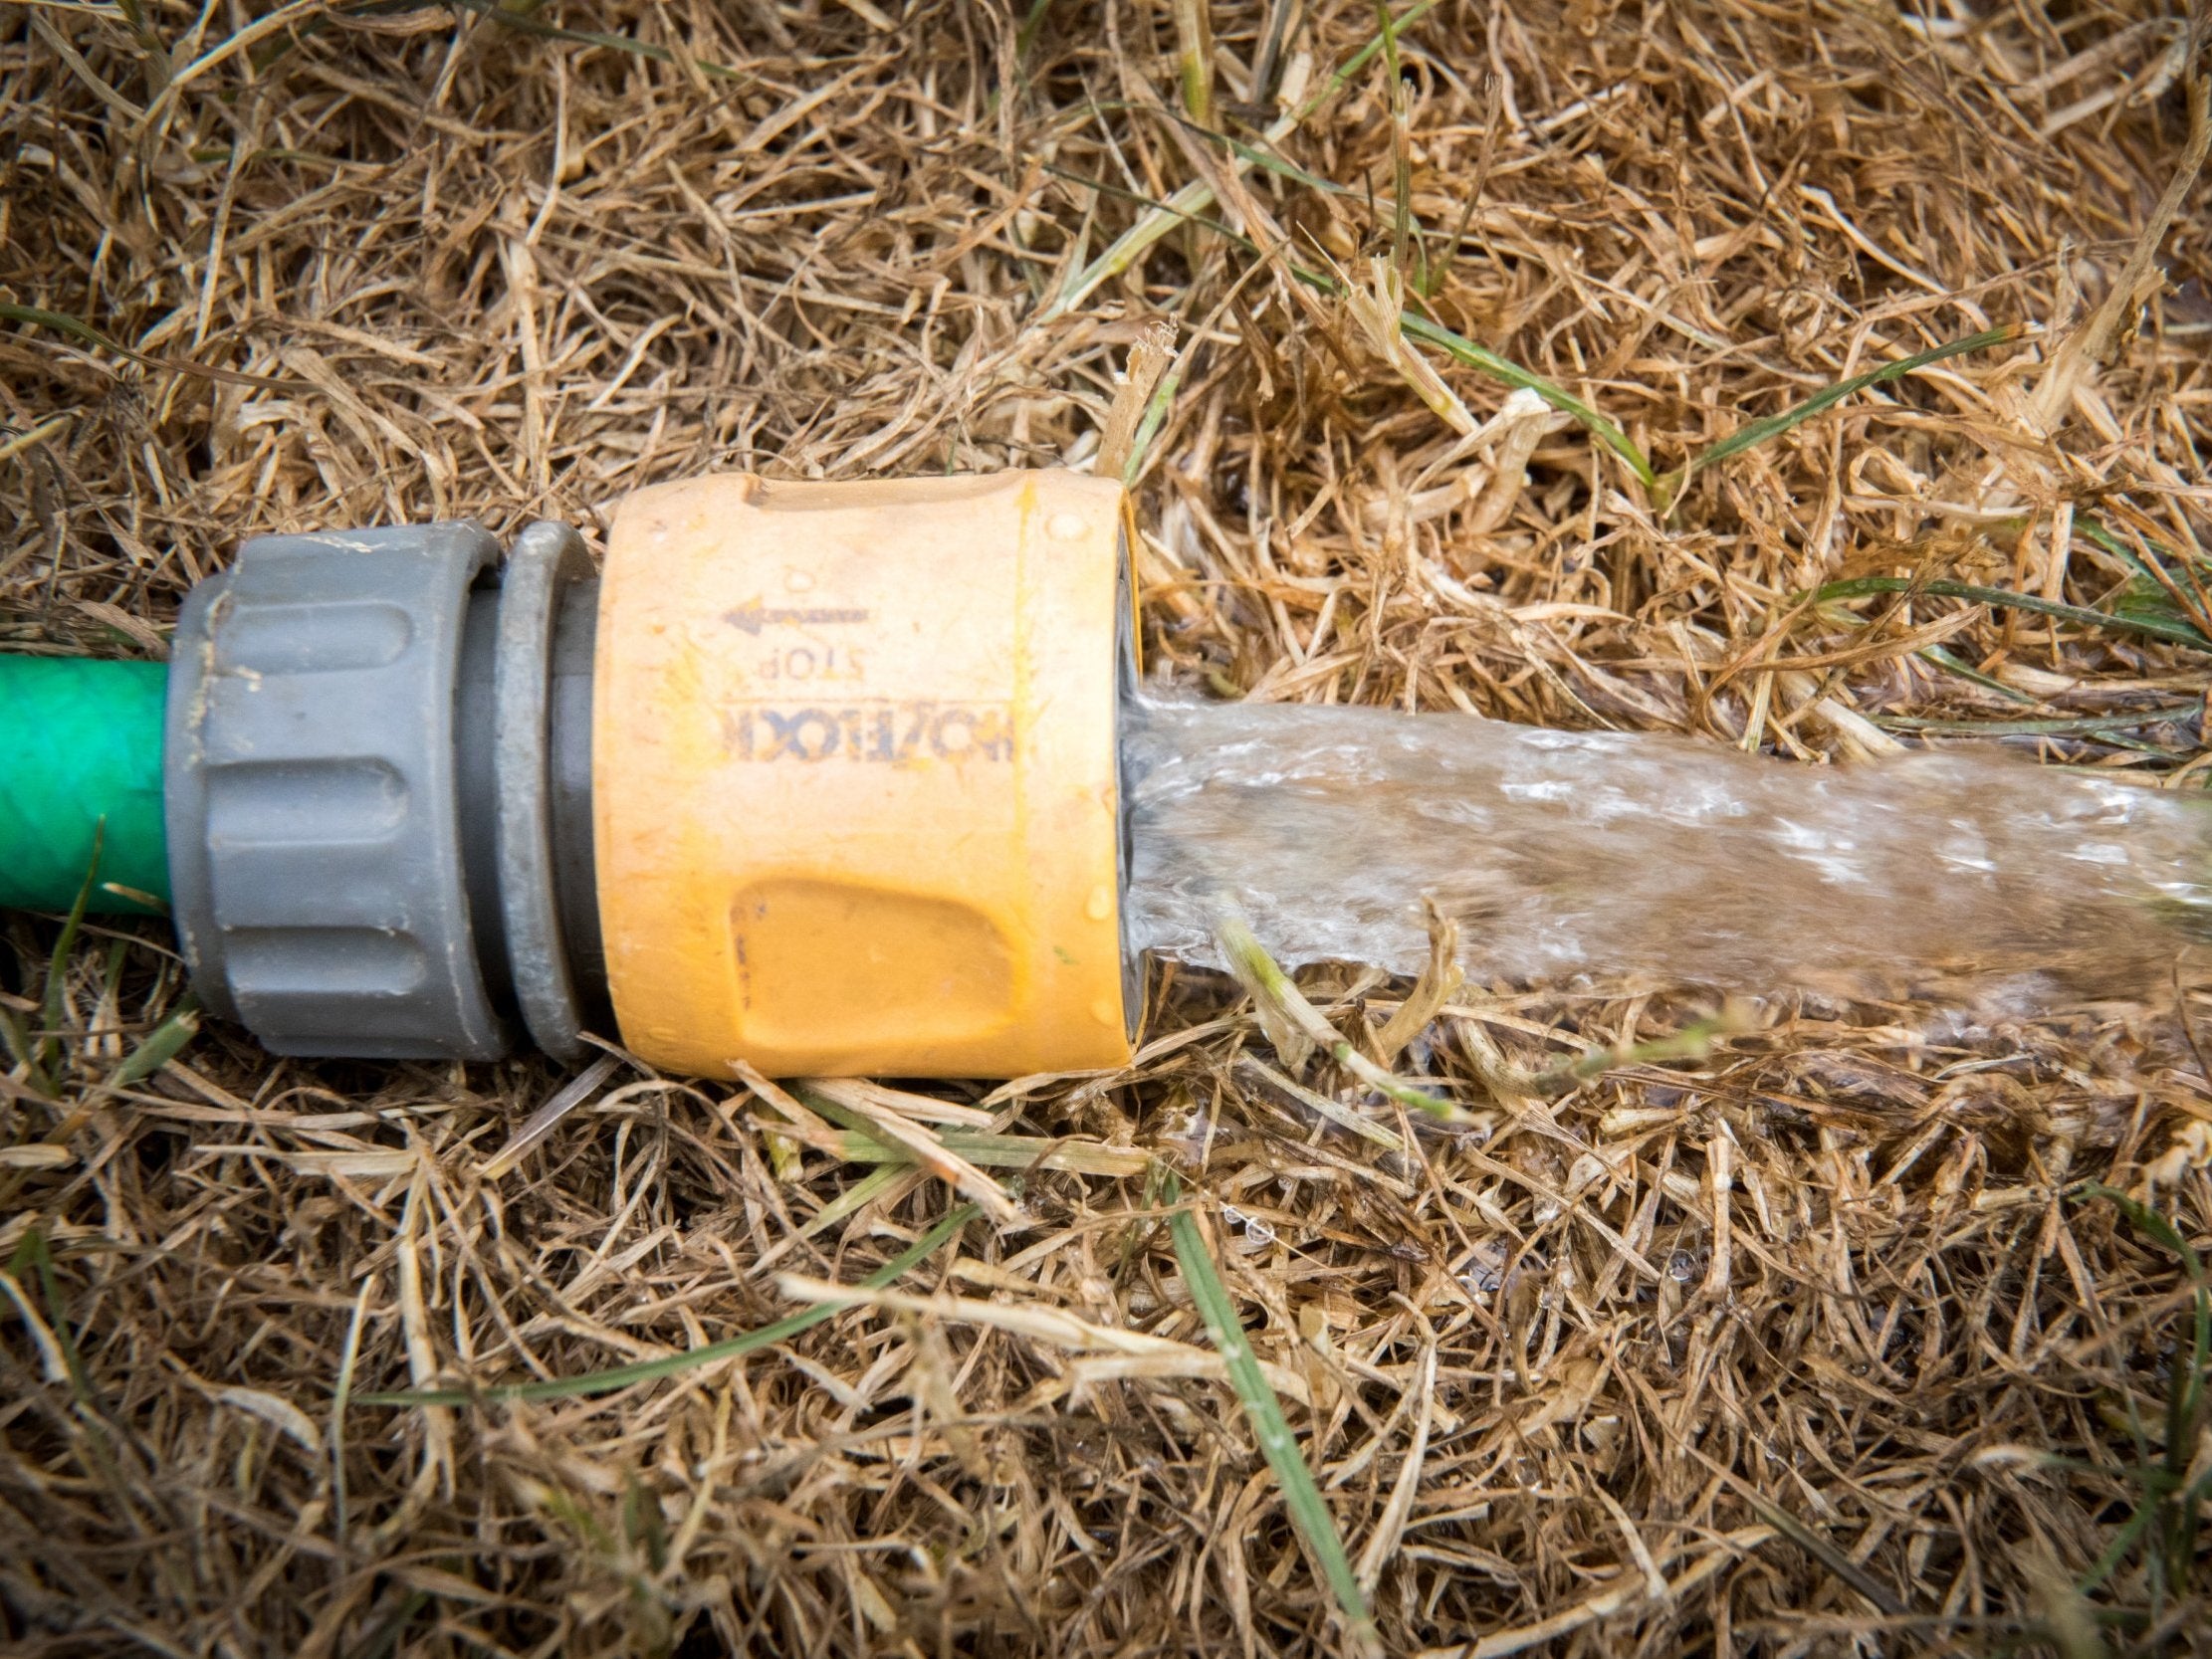 A hosepipe ban has been introduced in Kent and Sussex